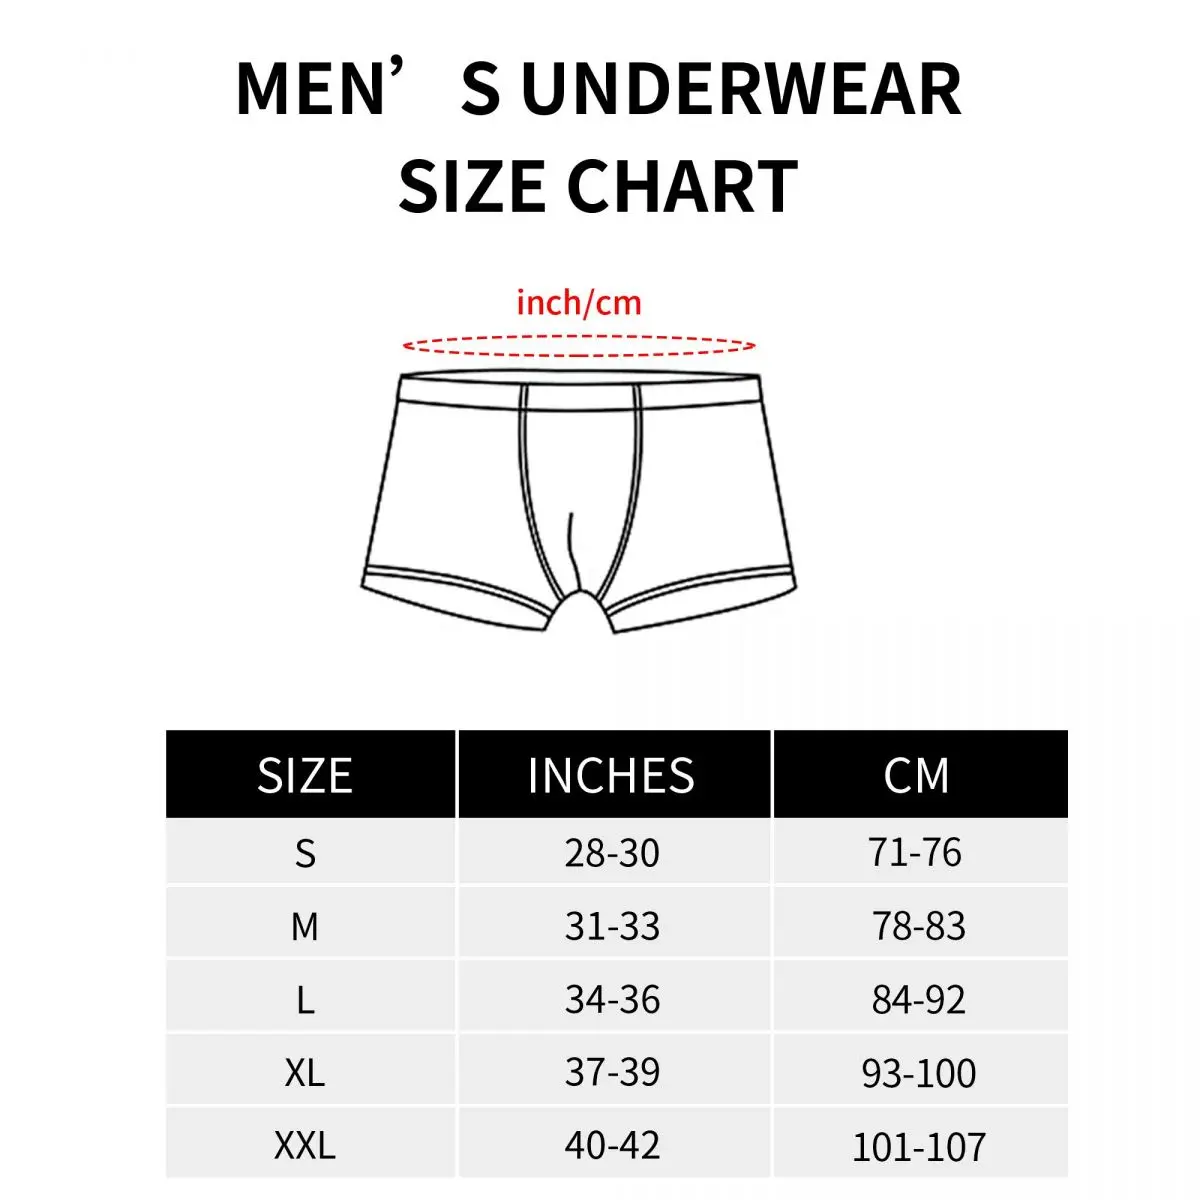 Bob The Builder Men's Underwear Can We Fix It Funny Repair Boxer Shorts  Panties Funny Breathable Underpants for Male Plus Size